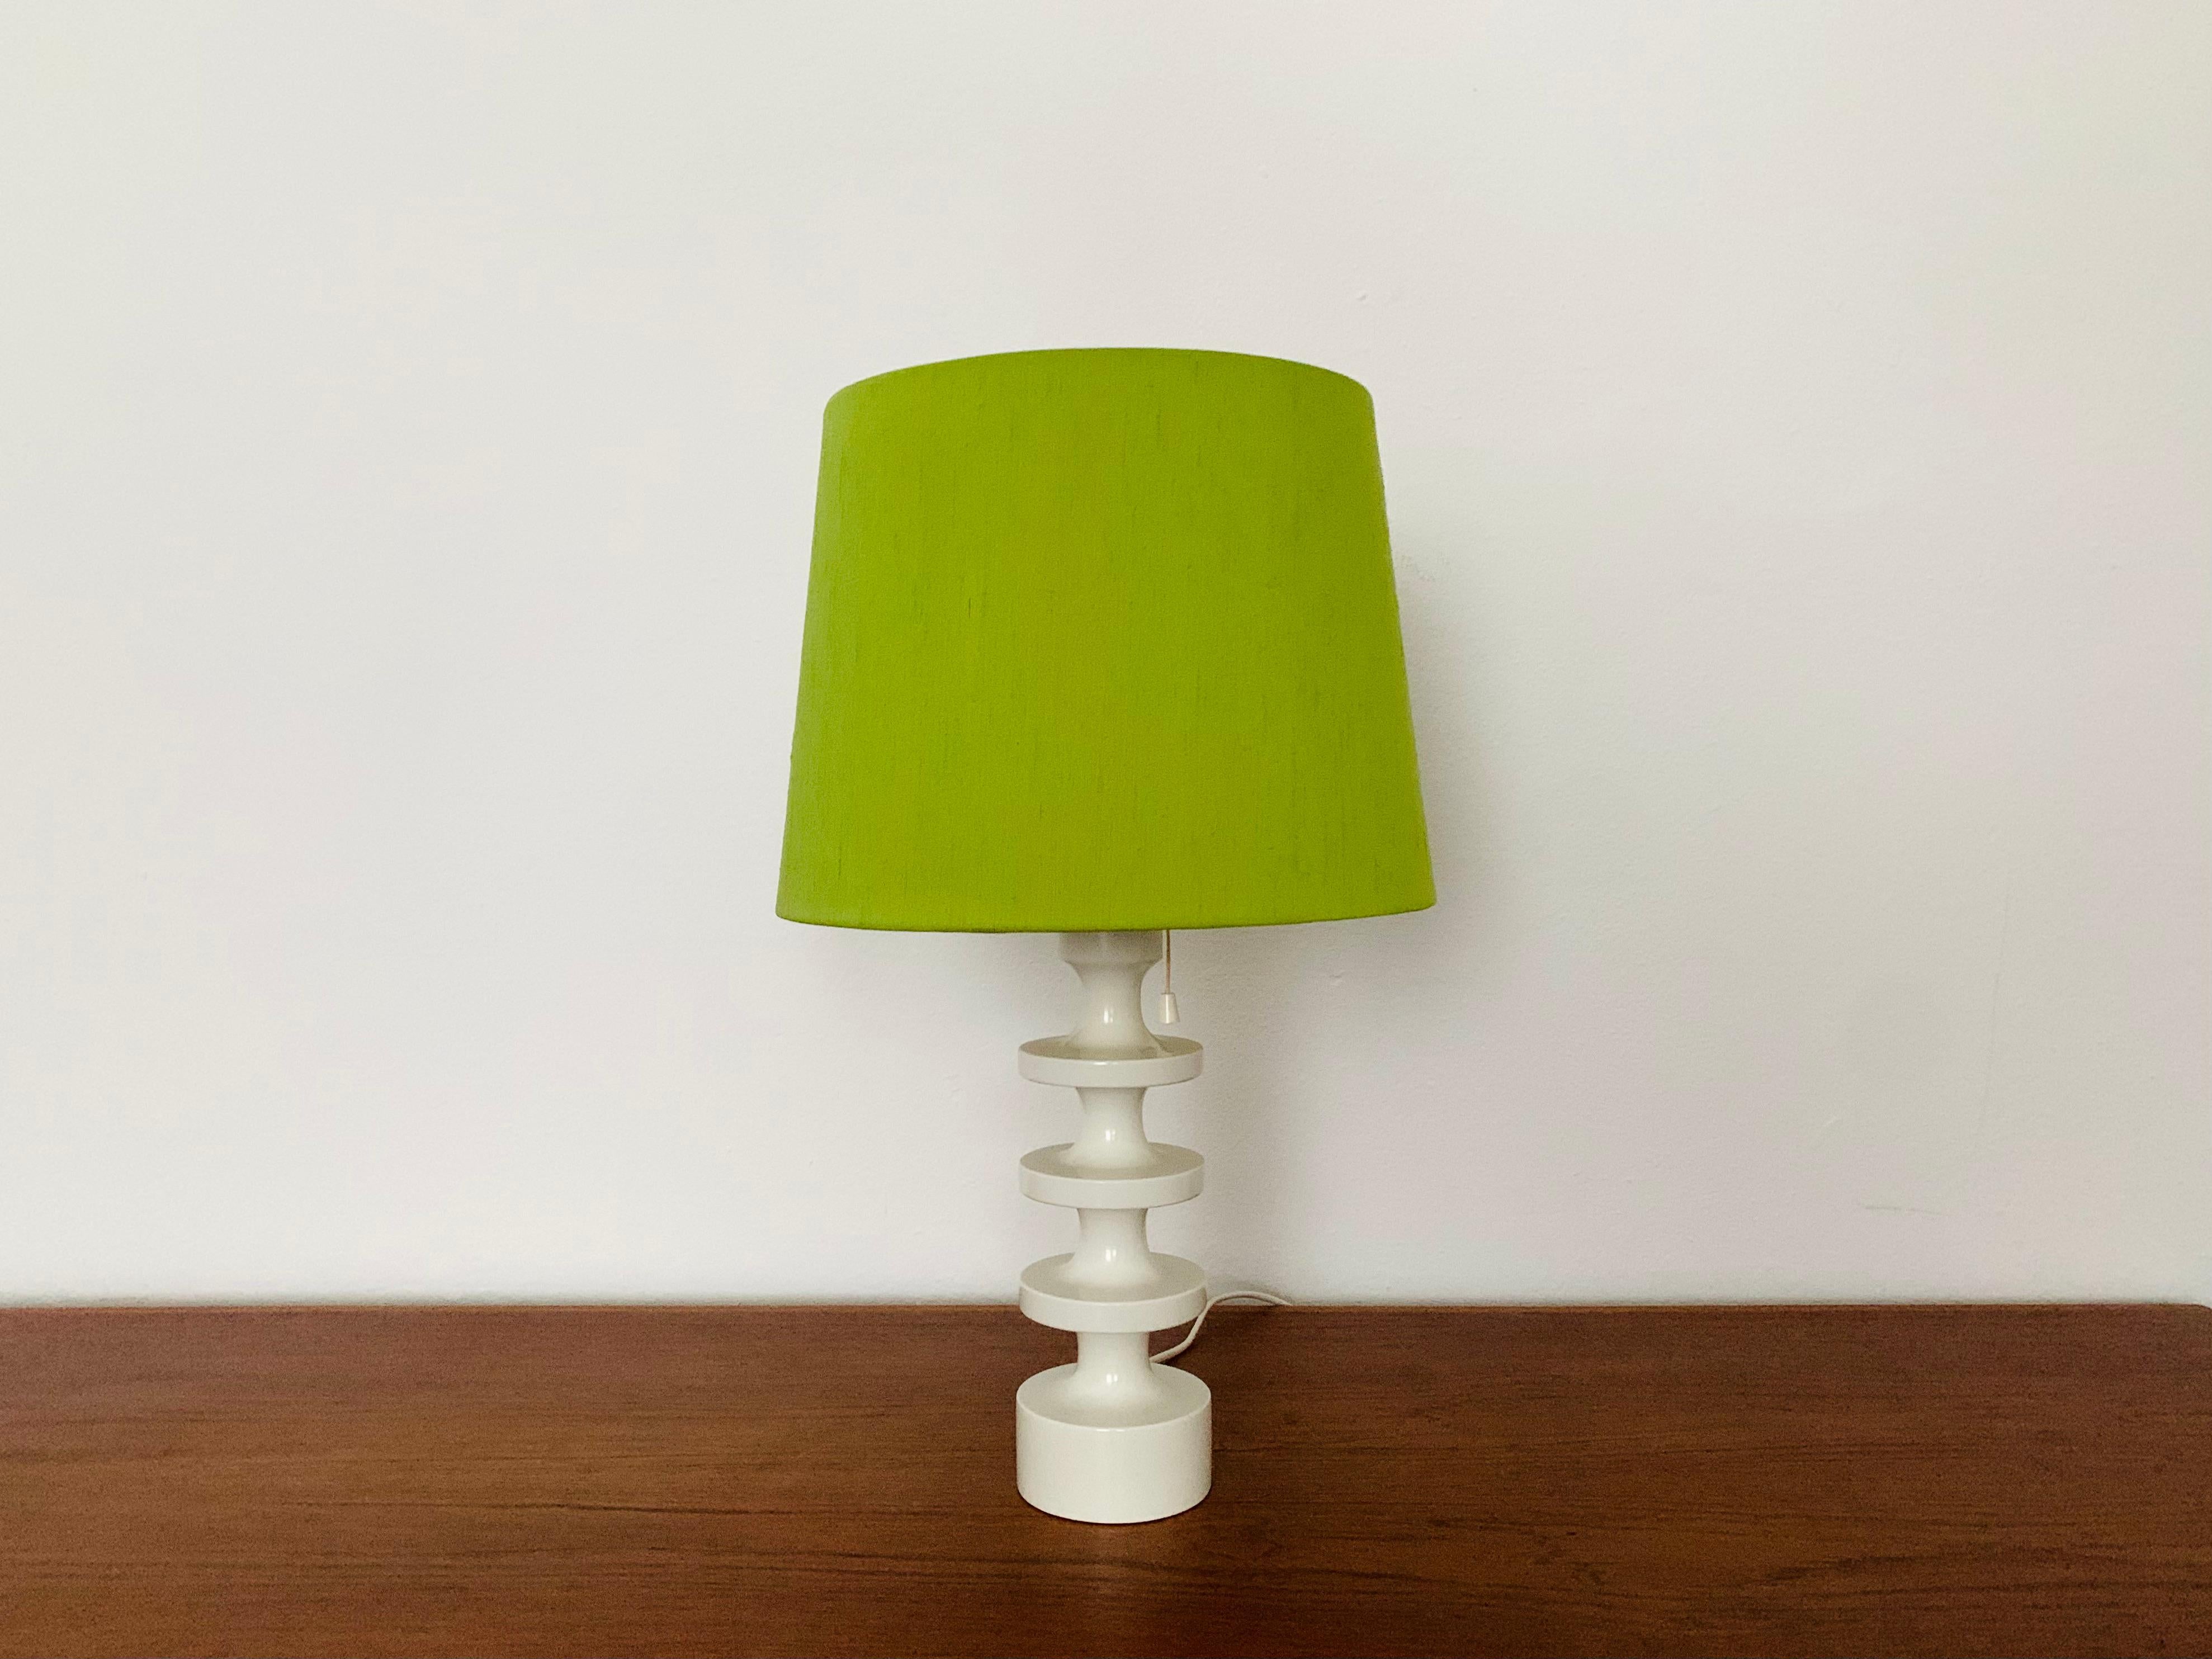 Extremely rare and beautiful Swedish table lamp from the 1960s.
Great and unusual design with a fantastically elegant appearance.

Manufacturer: Luxury
Design: Uno and Östen Kristiansson

Condition:

Very good vintage condition with slight